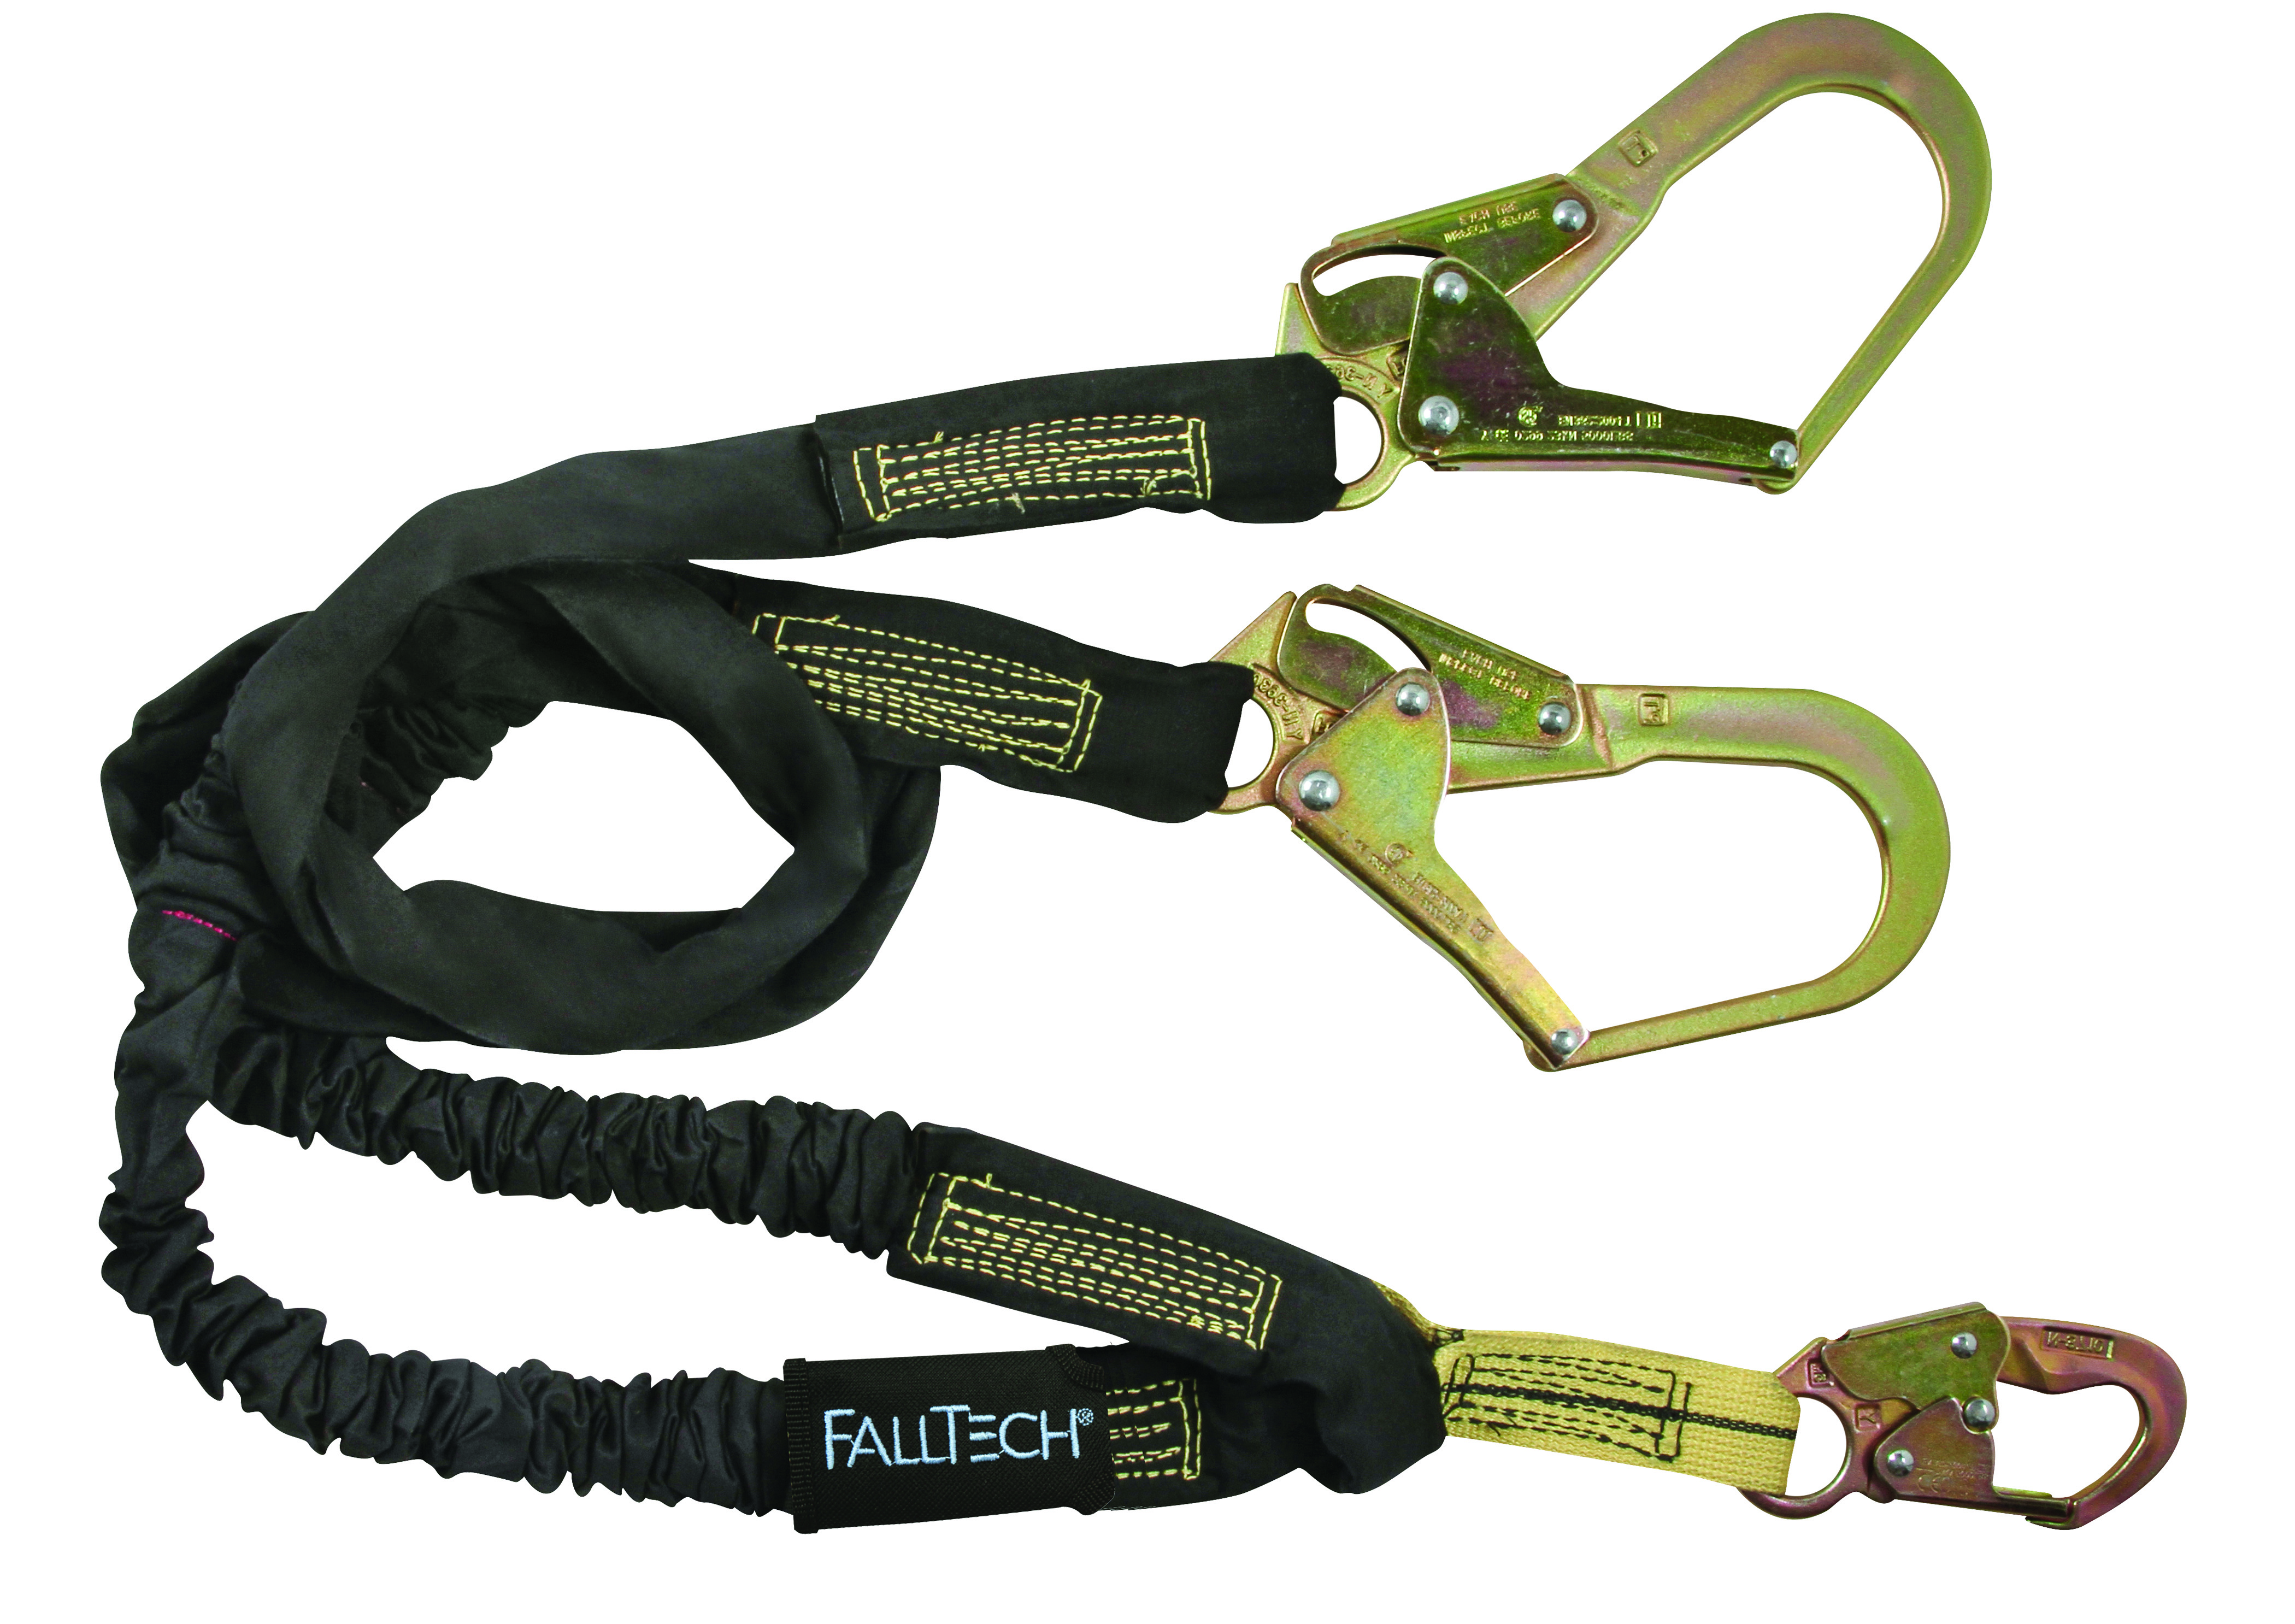 FallTech Speciality Weldtech Soft Pack Lanyard from Columbia Safety